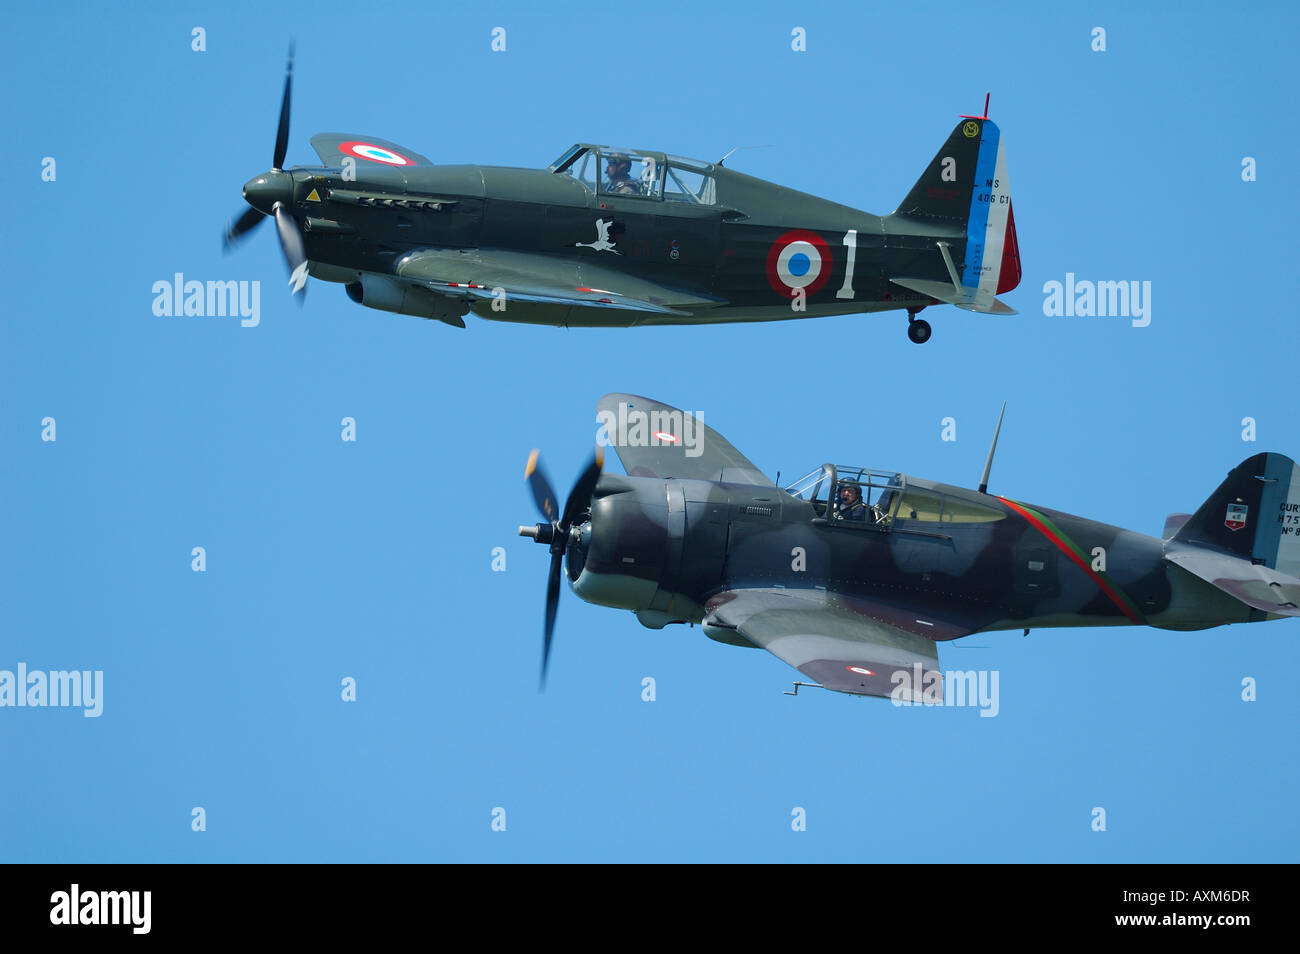 Old WWII fighter : down, Curtiss Hawk H 75 and up Morane D-406 (also ref D-3801) during french vintage air show, La Ferte Alais Stock Photo